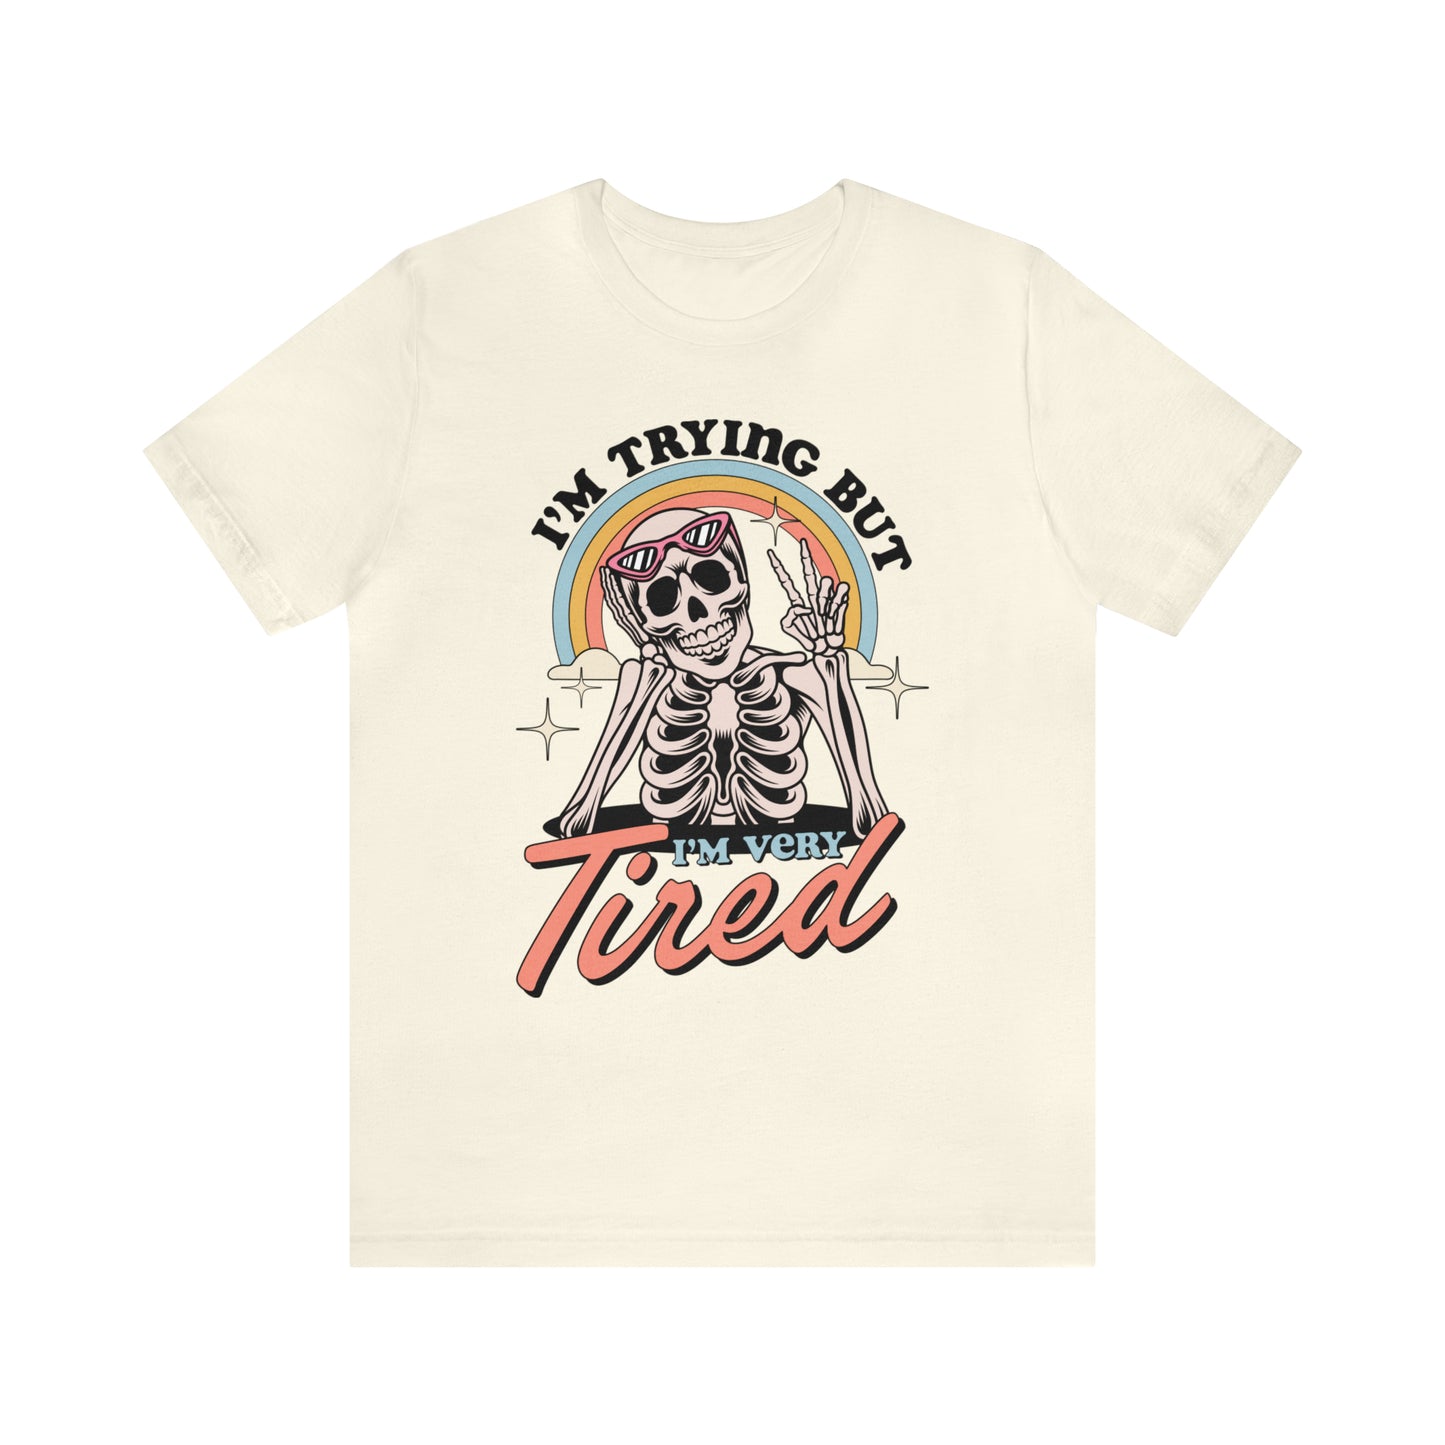 "I'm Trying But I'm Tired" Bella Canvas Unisex Short Sleeve Tee